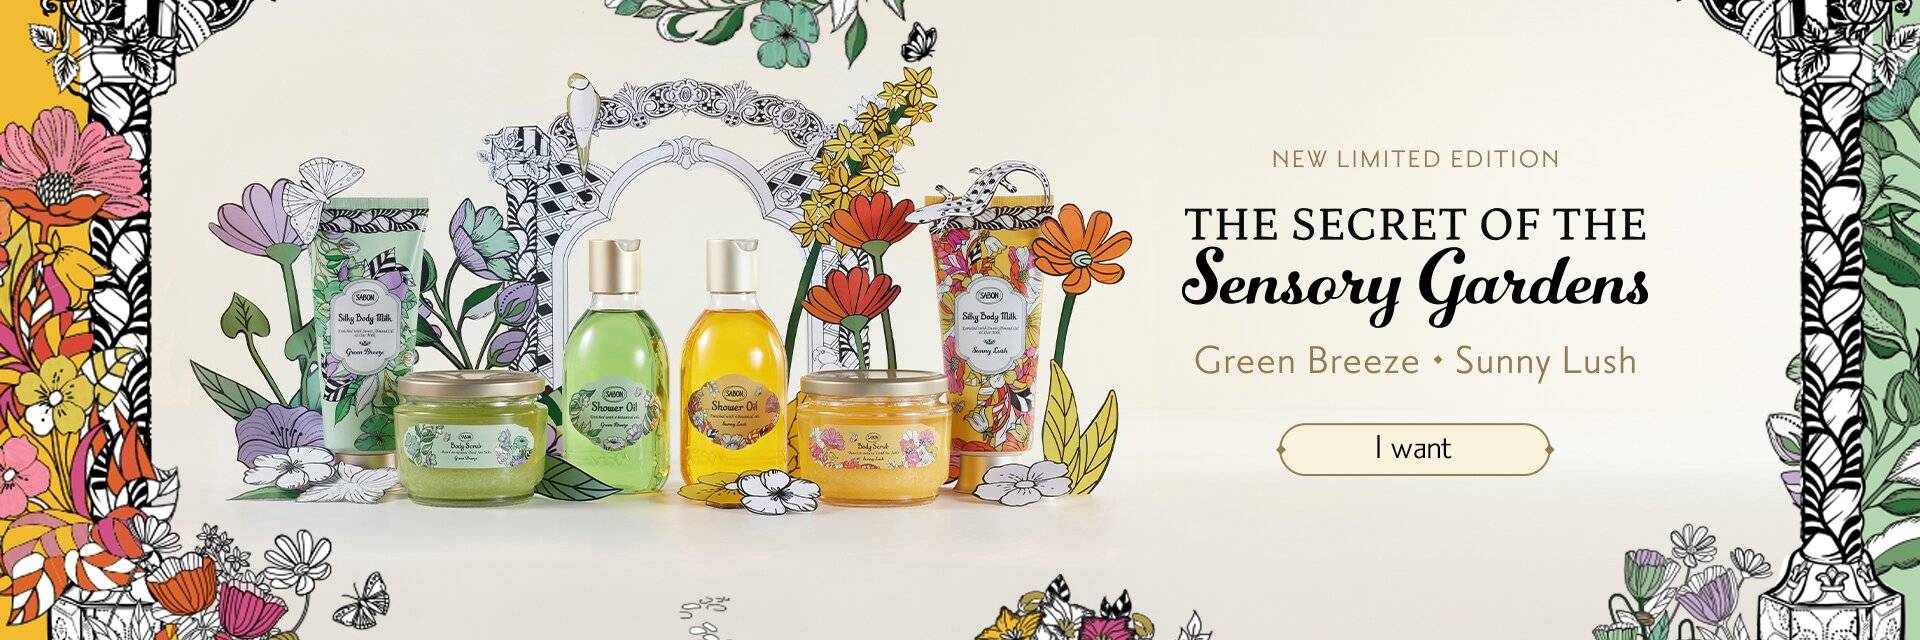 The new limited edition The Secret of Sensory Garden. Beyond the collection page: 